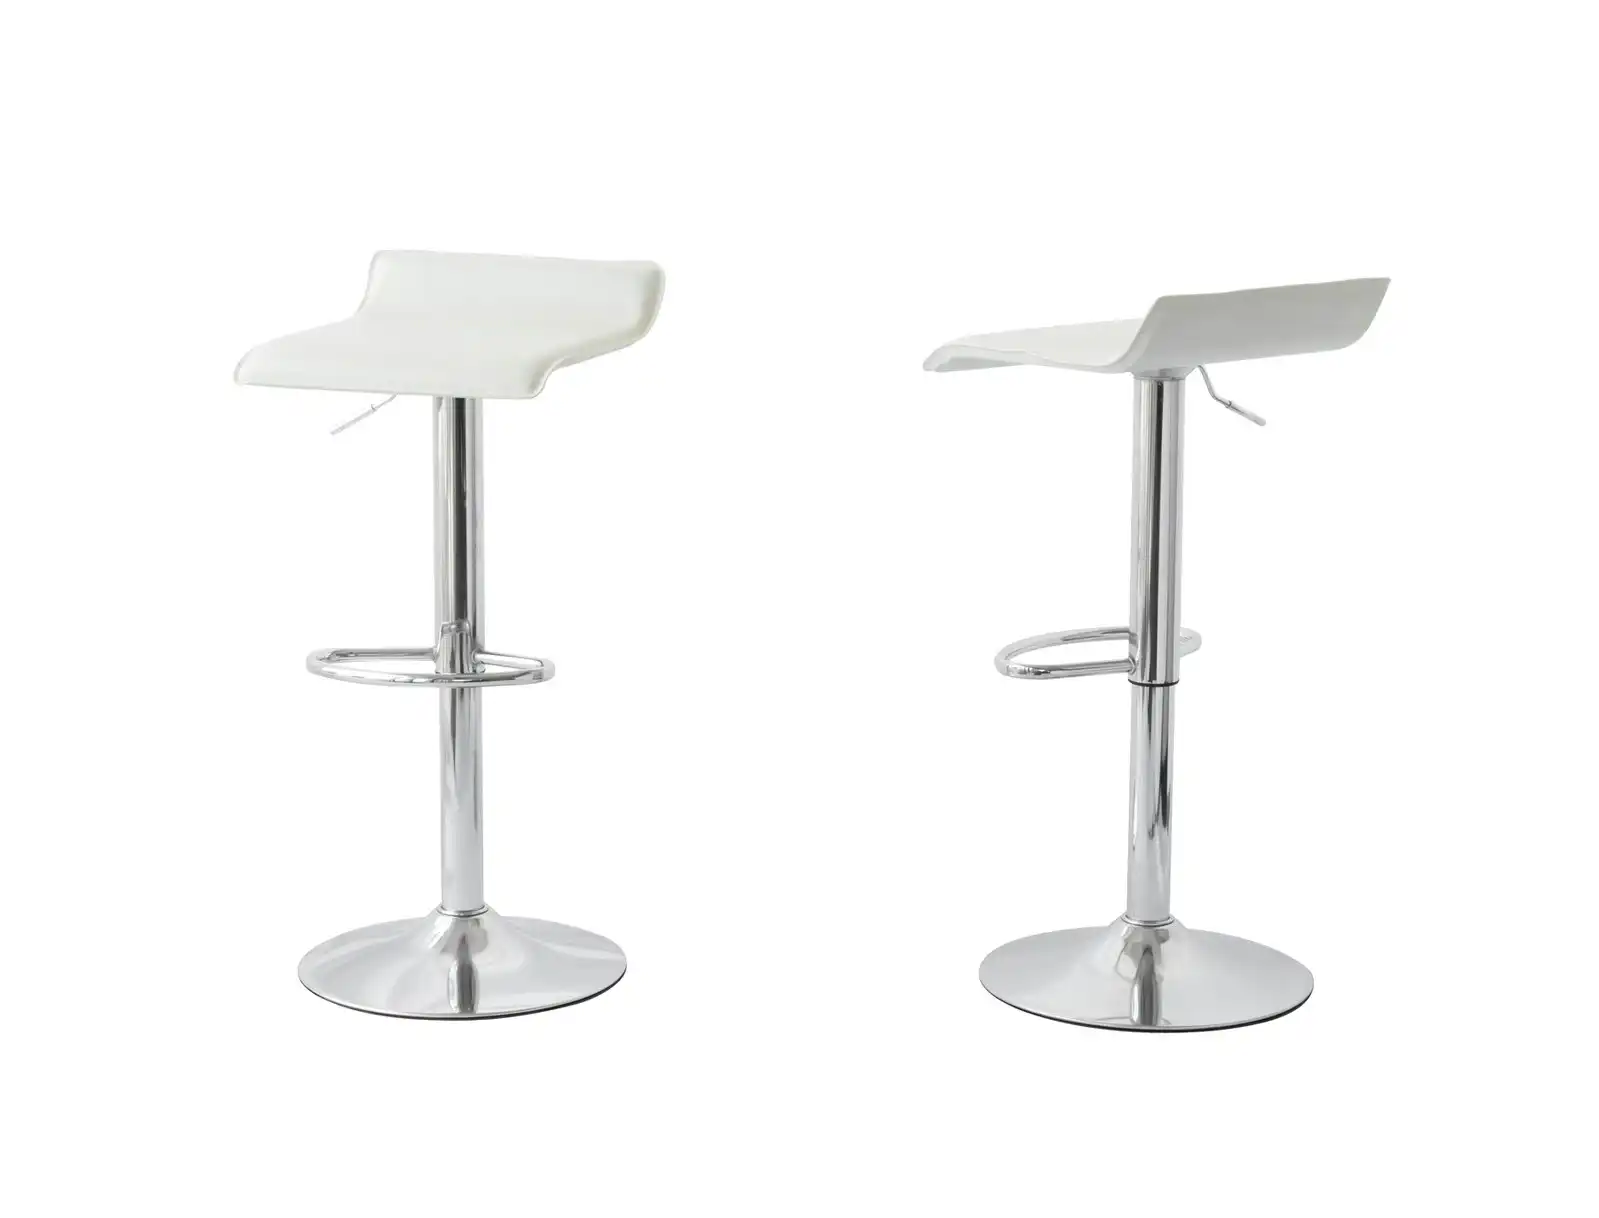 2 Leather Barstools (White) w/ Adjustable Height, 63-85cm